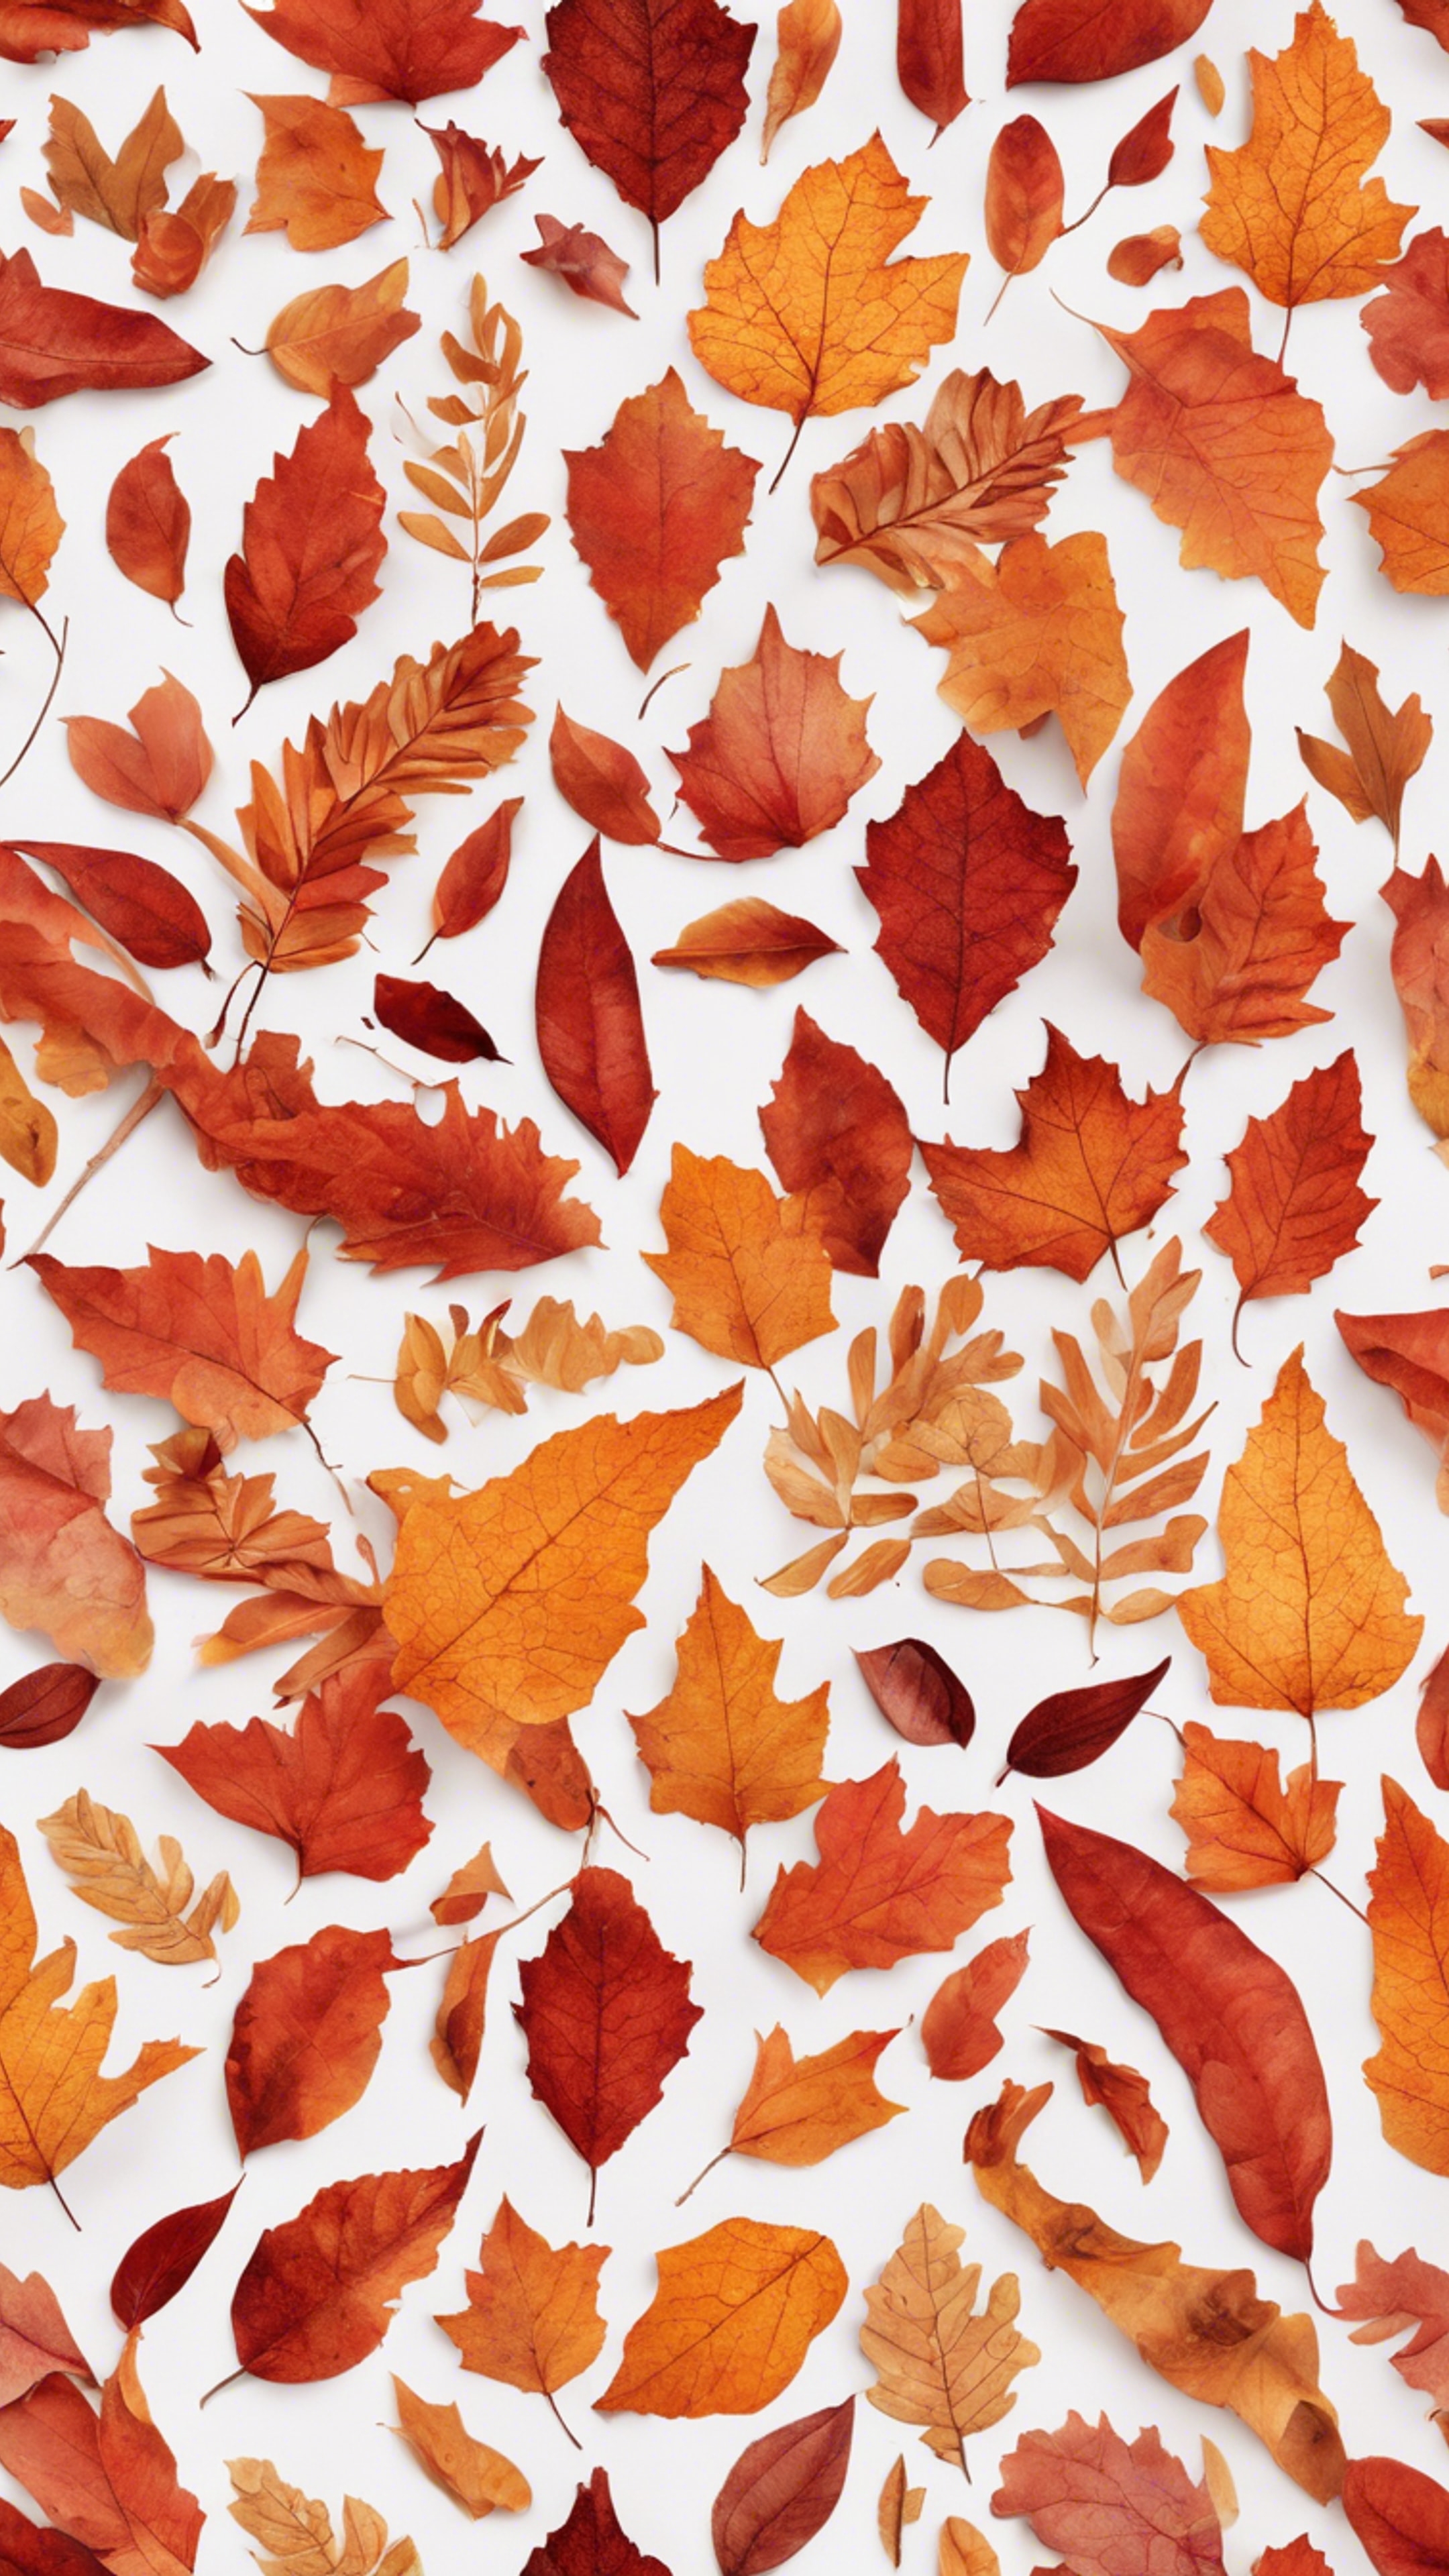 A fiery autumn pattern, reminiscent of falling leaves, in a seamless mix of red and orange. Behang[40781a28d8554bd2886e]